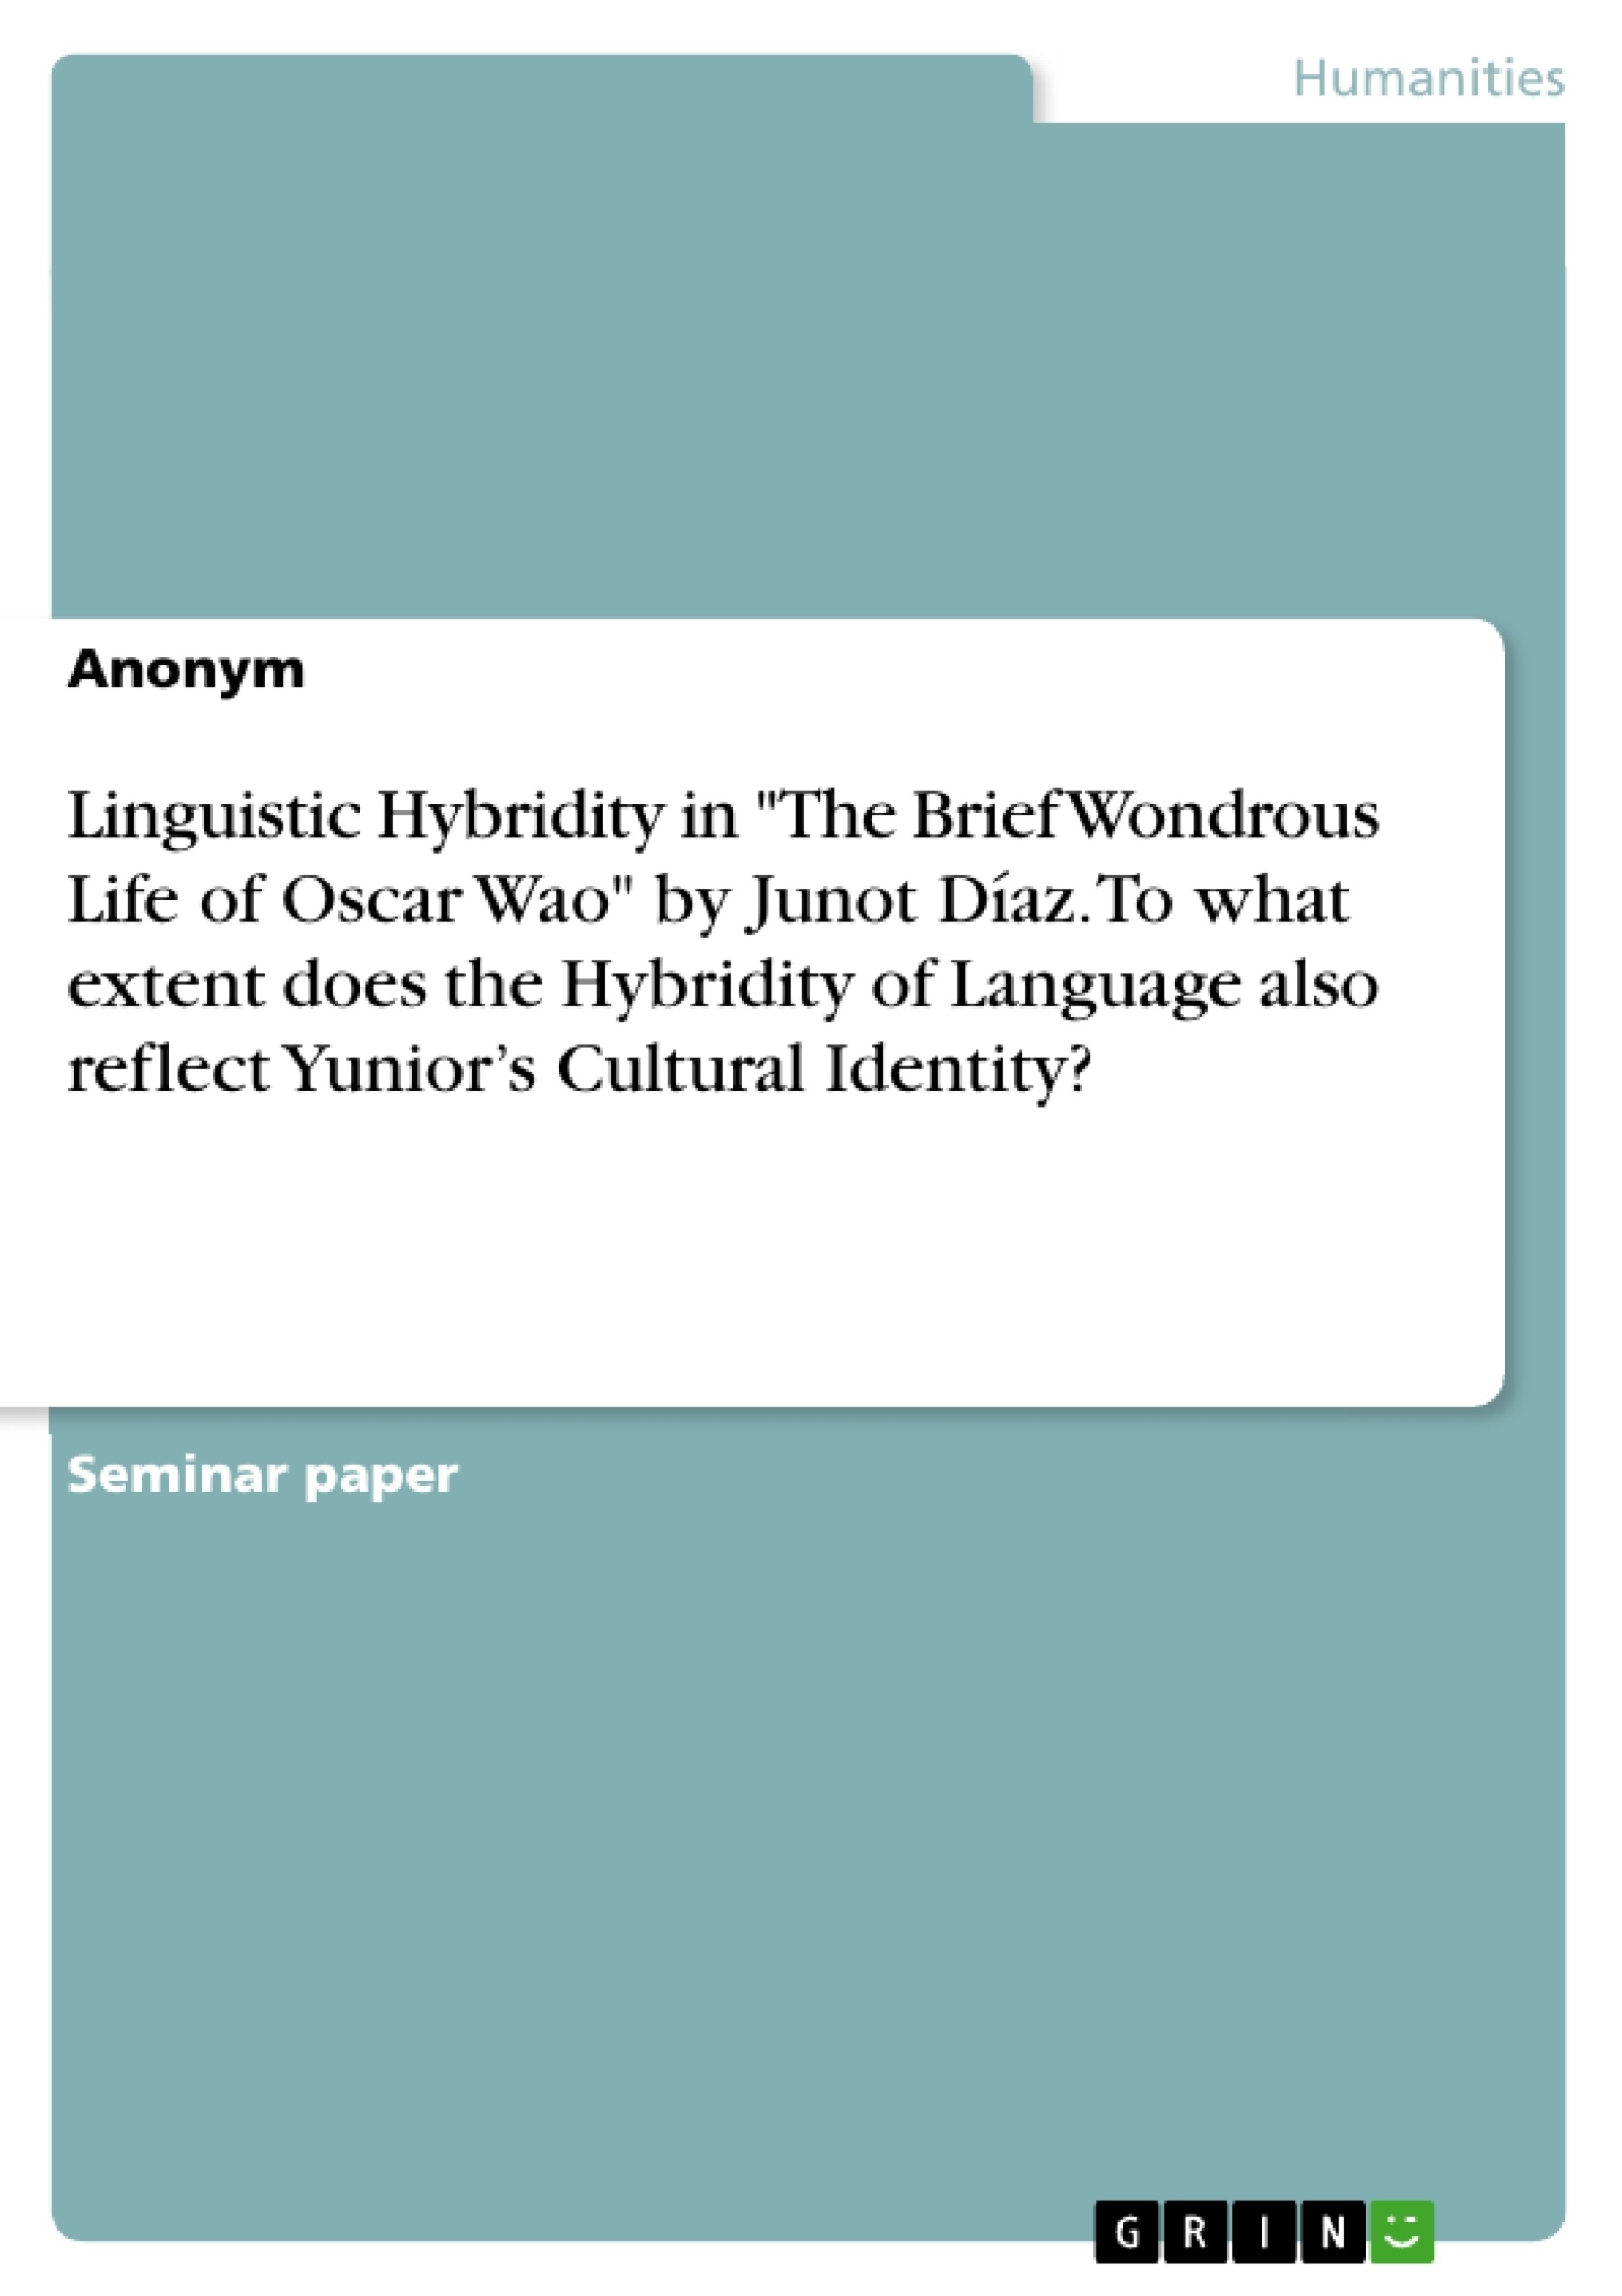 Title: Linguistic Hybridity in "The Brief Wondrous Life of Oscar Wao" by Junot Díaz. To what extent does the Hybridity of Language also reflect Yunior’s Cultural Identity?